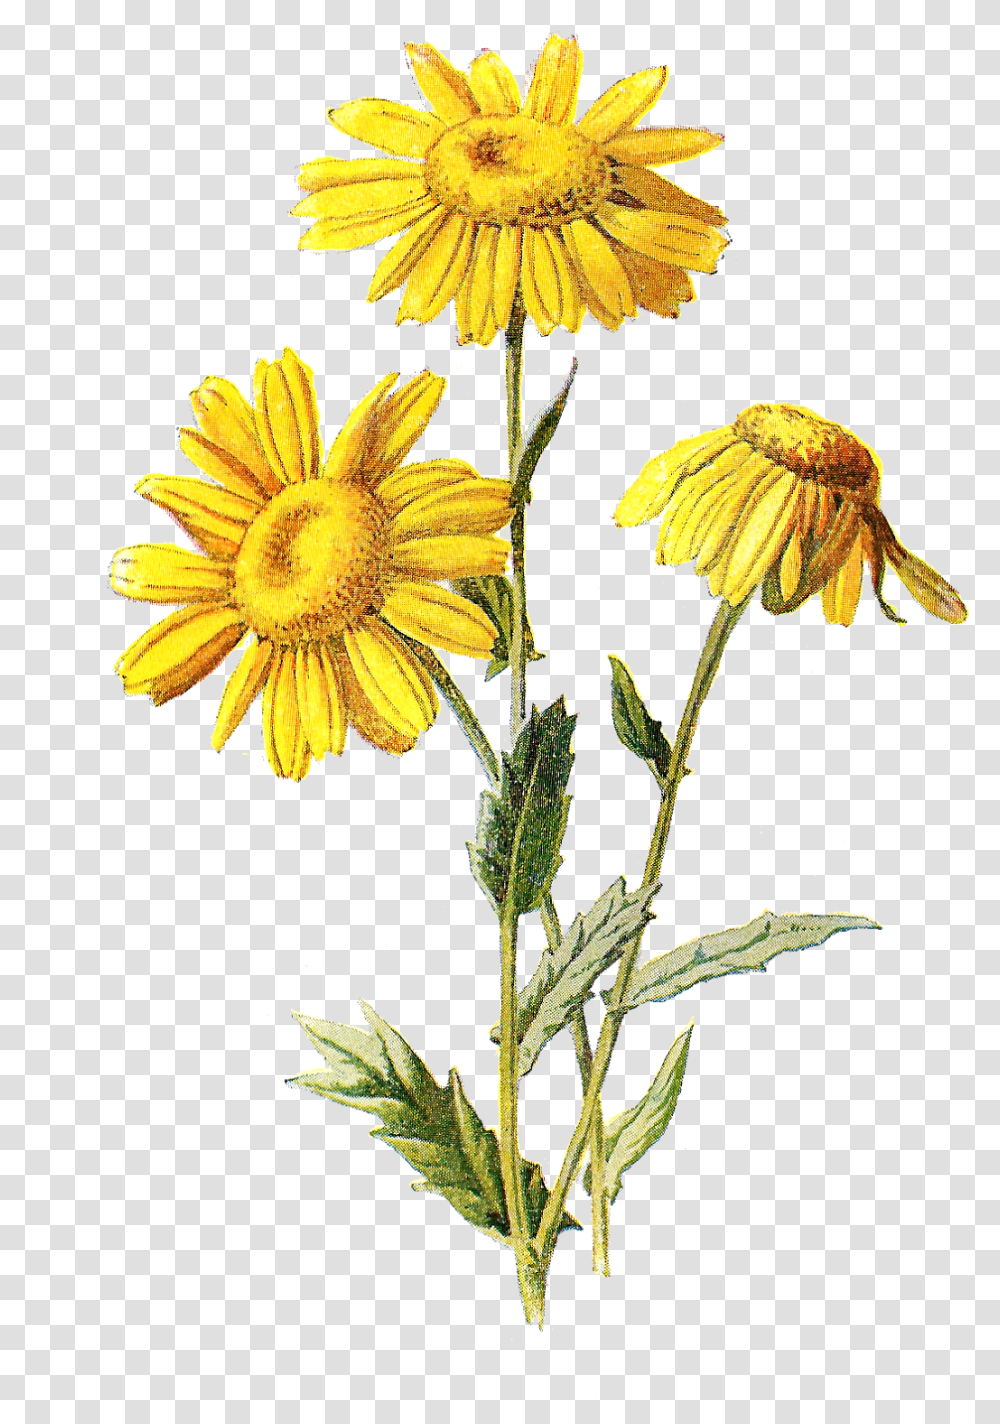 Free Digital Wildflower Downloads Wildflower Drawing Flower, Plant, Blossom, Daisy, Daisies Transparent Png